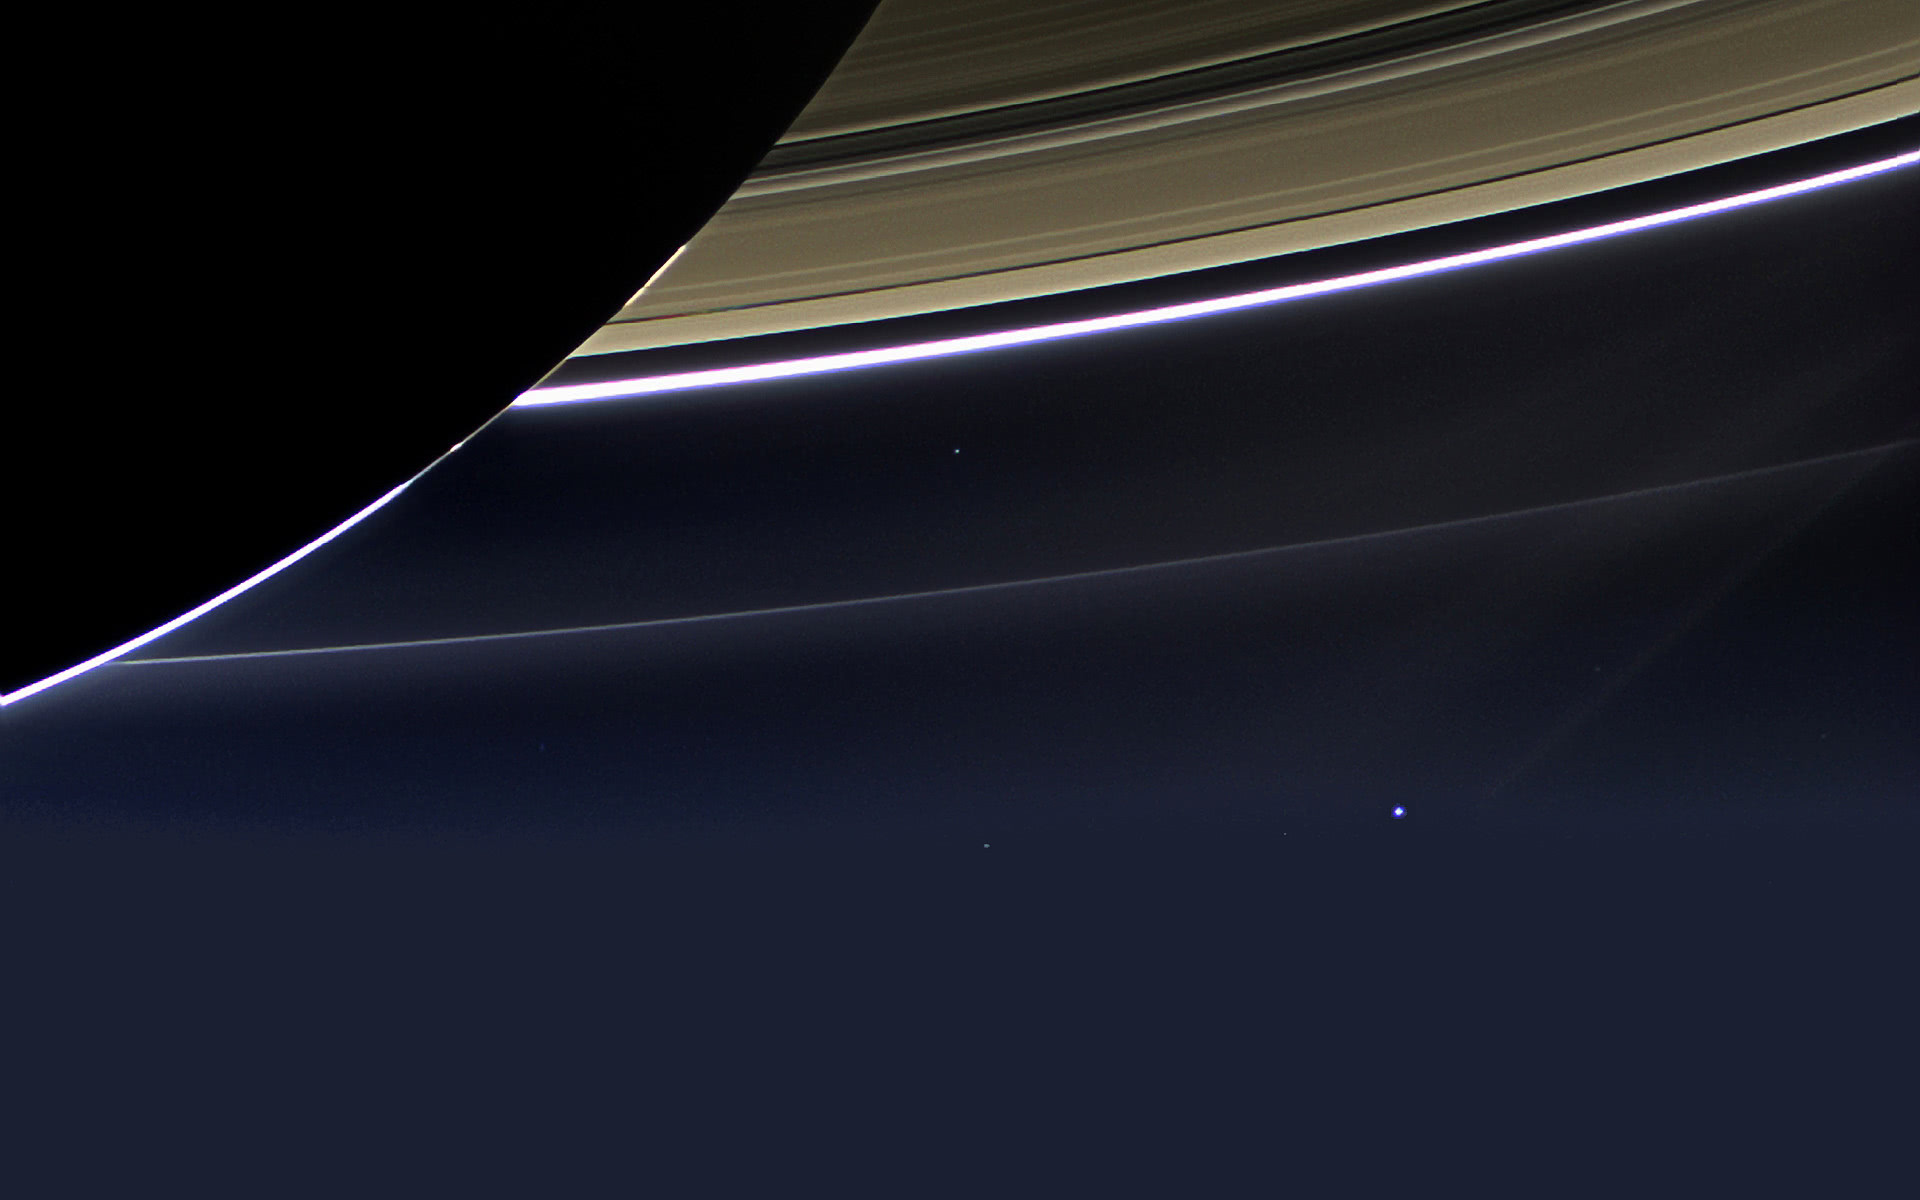 Earth Moon system seen from Saturn wallpaper